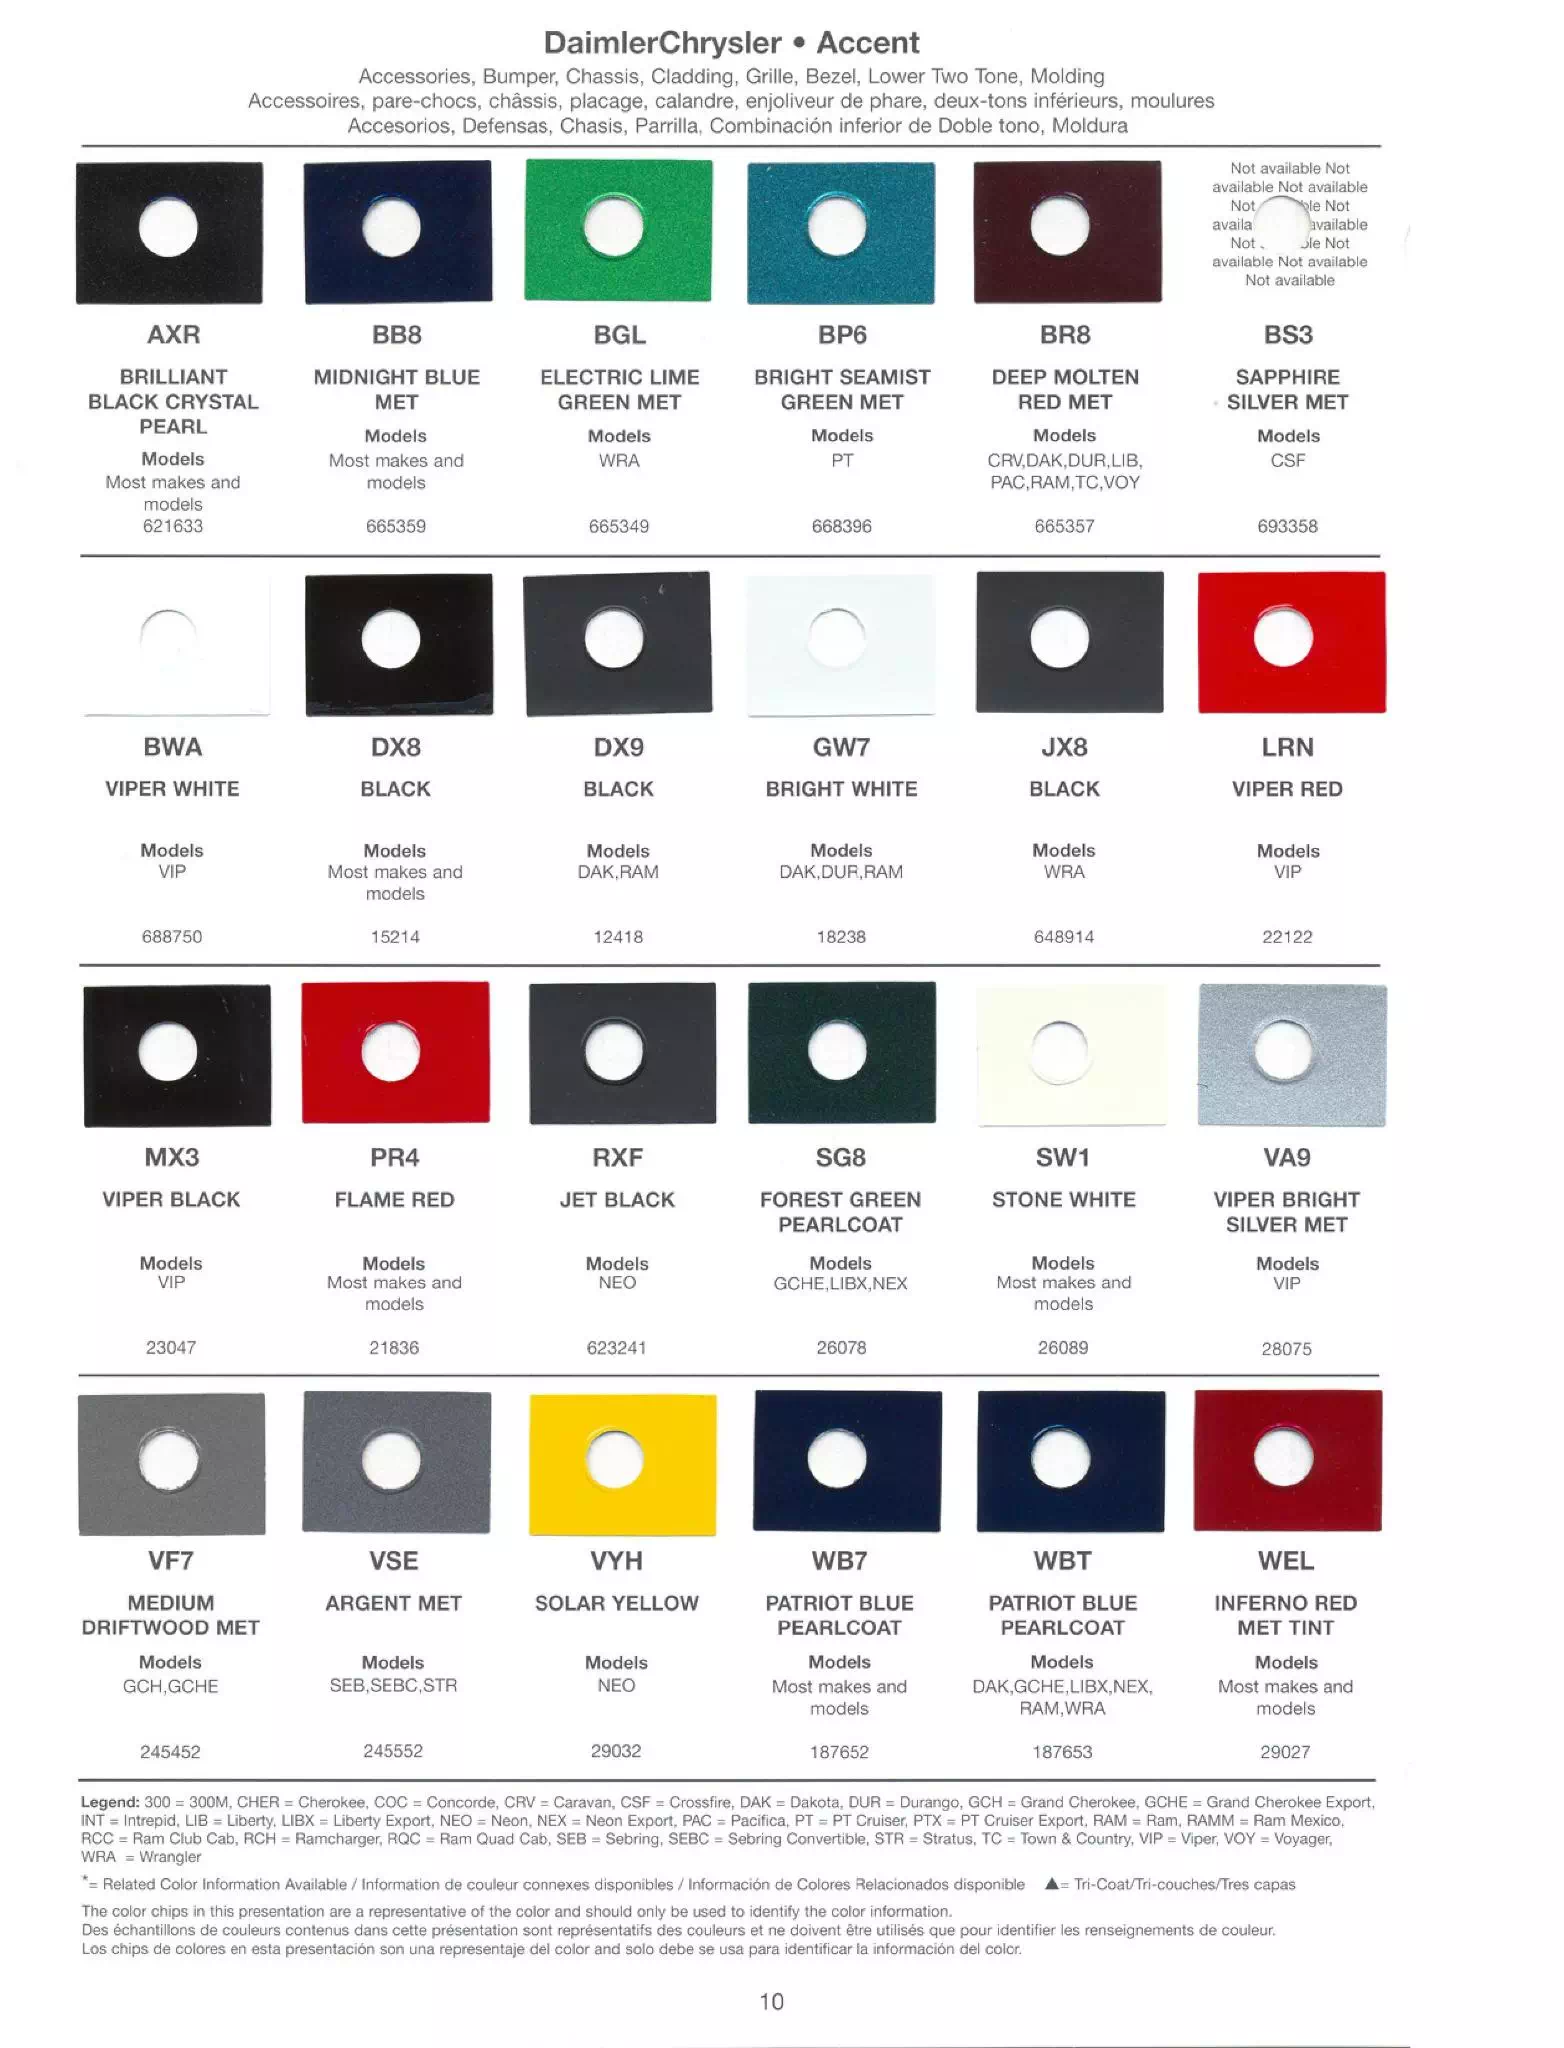 Exterior, Wheel, and Interior colors used on Dodge, Jeep, and Chrysler in 2004